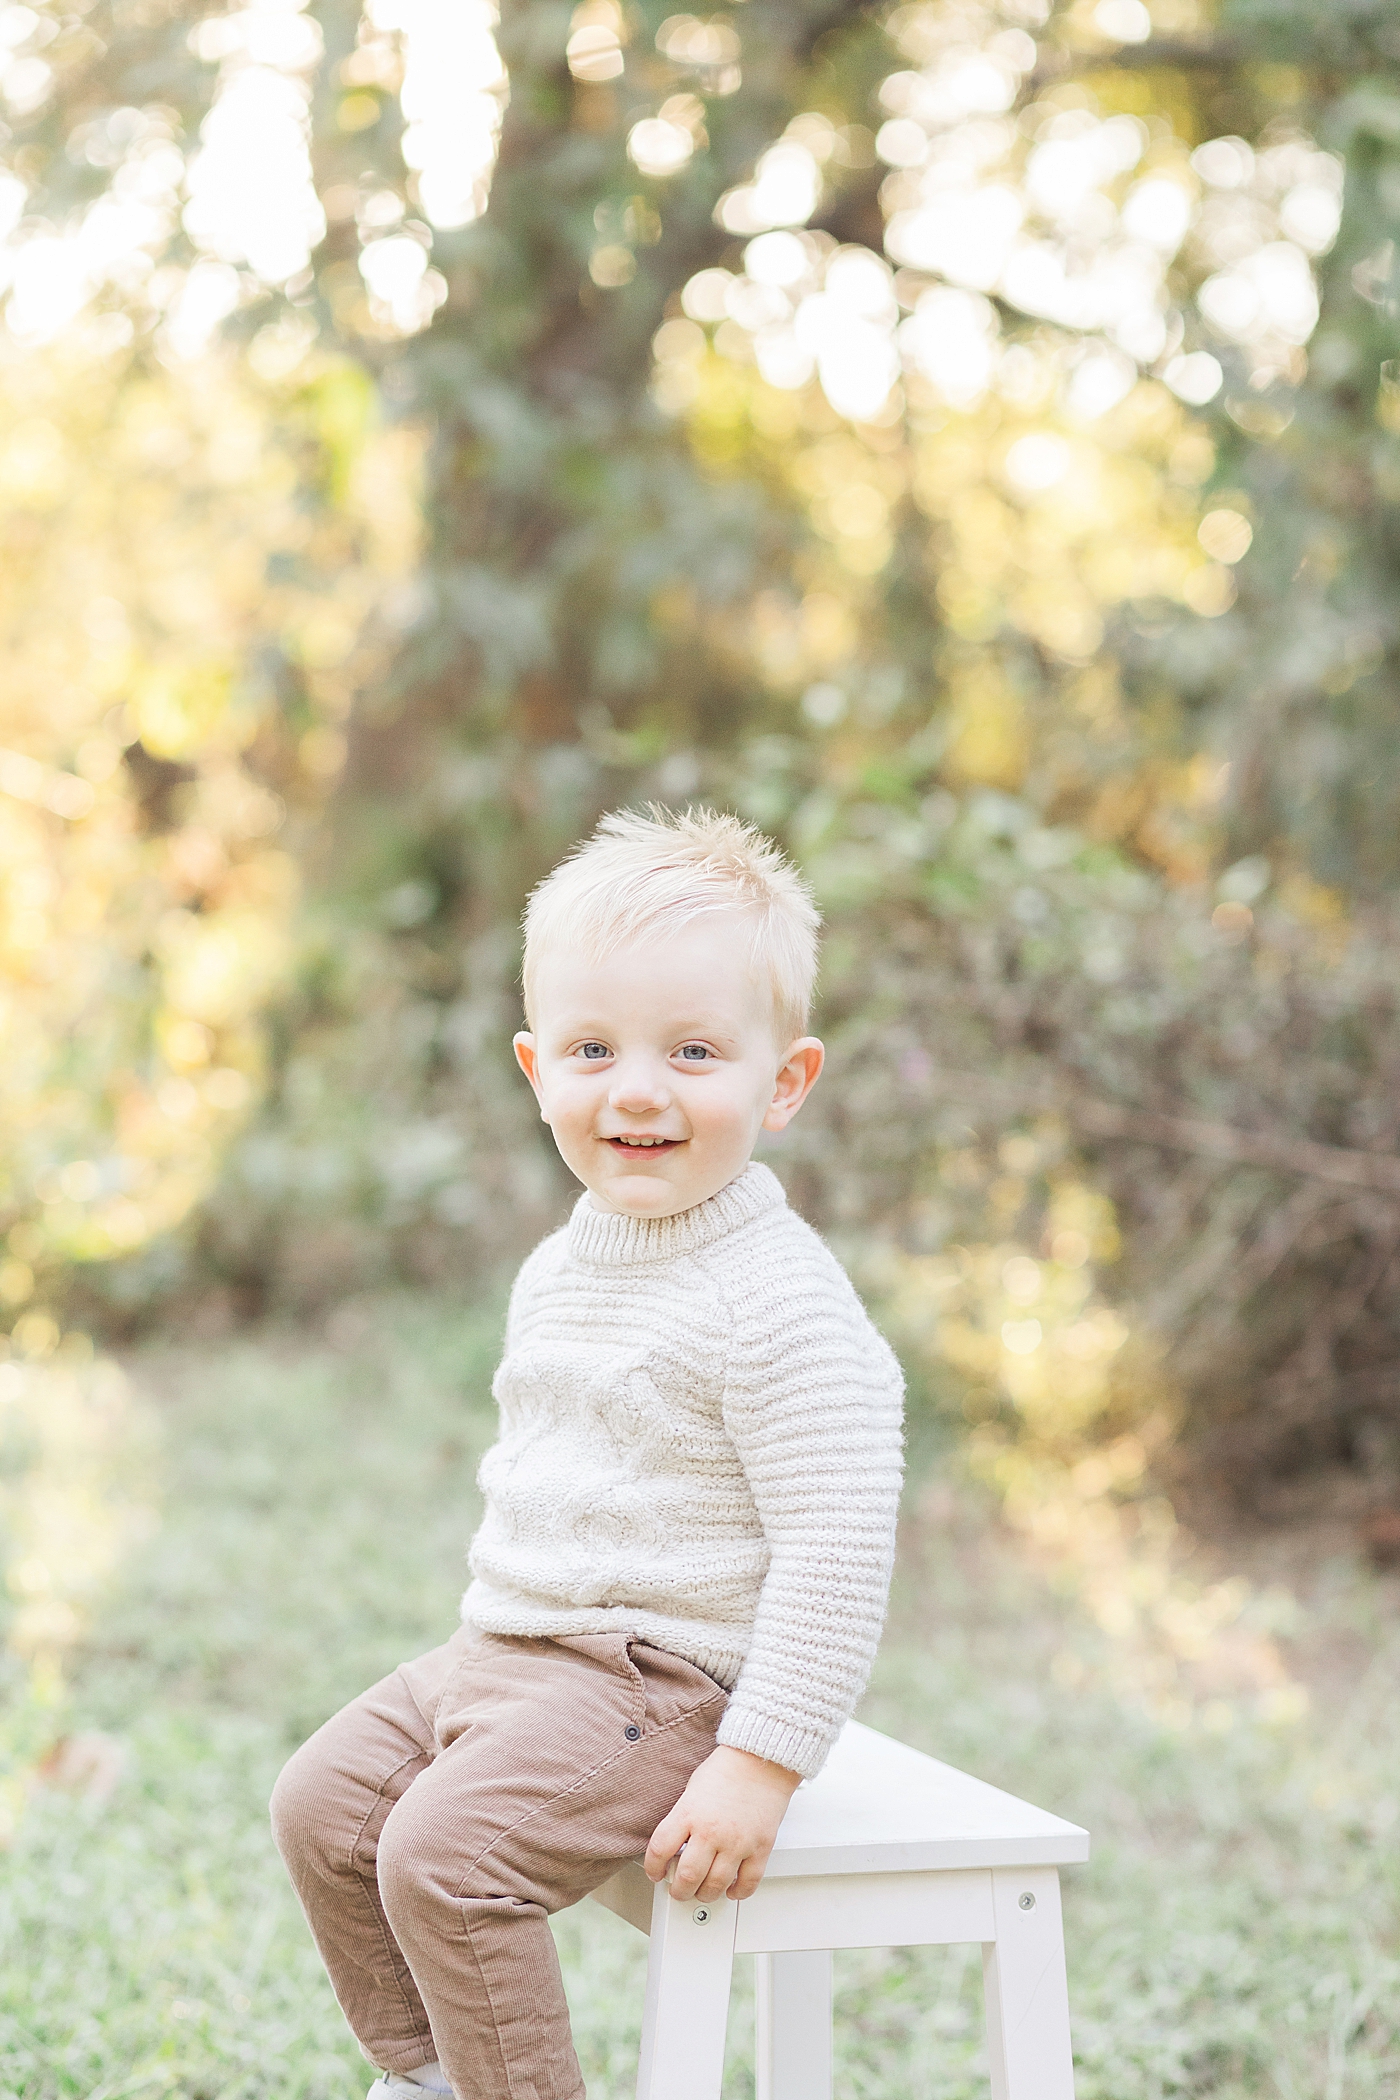 Children's portrait | The Heights, Texas | Photo by Fresh Light Photography